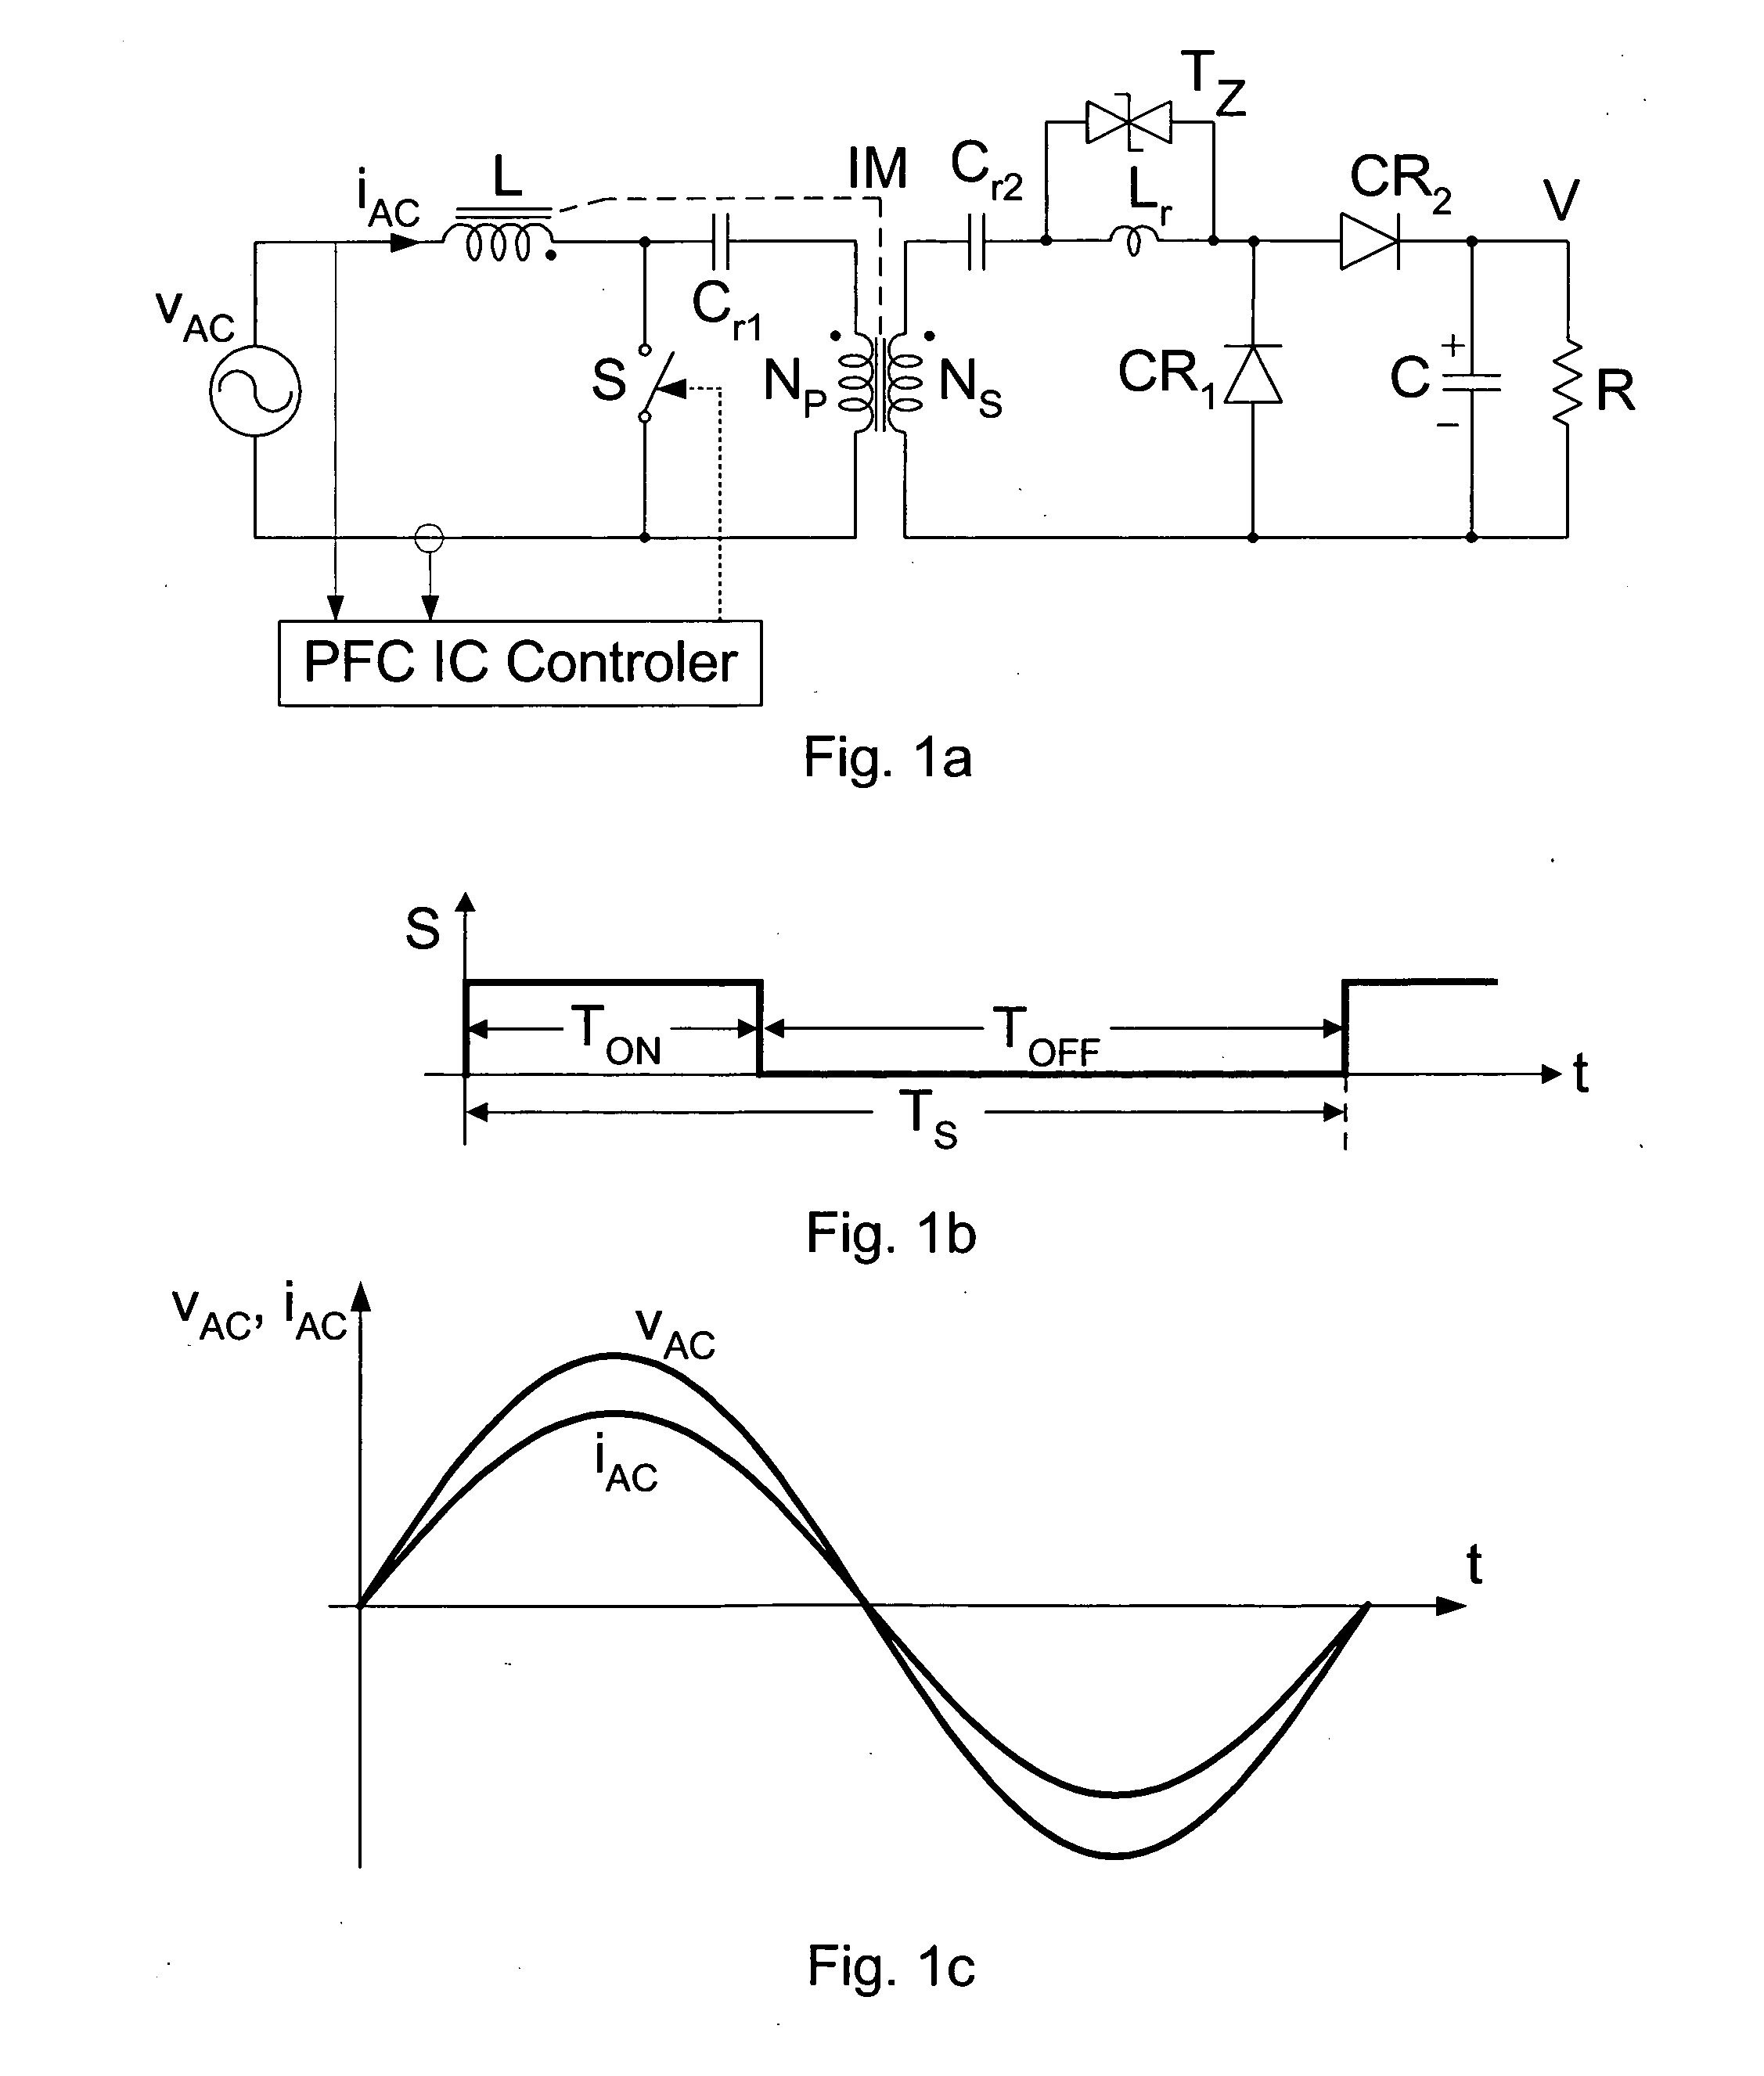 Single-stage AC-to-DC converter with isolation and power factor correction